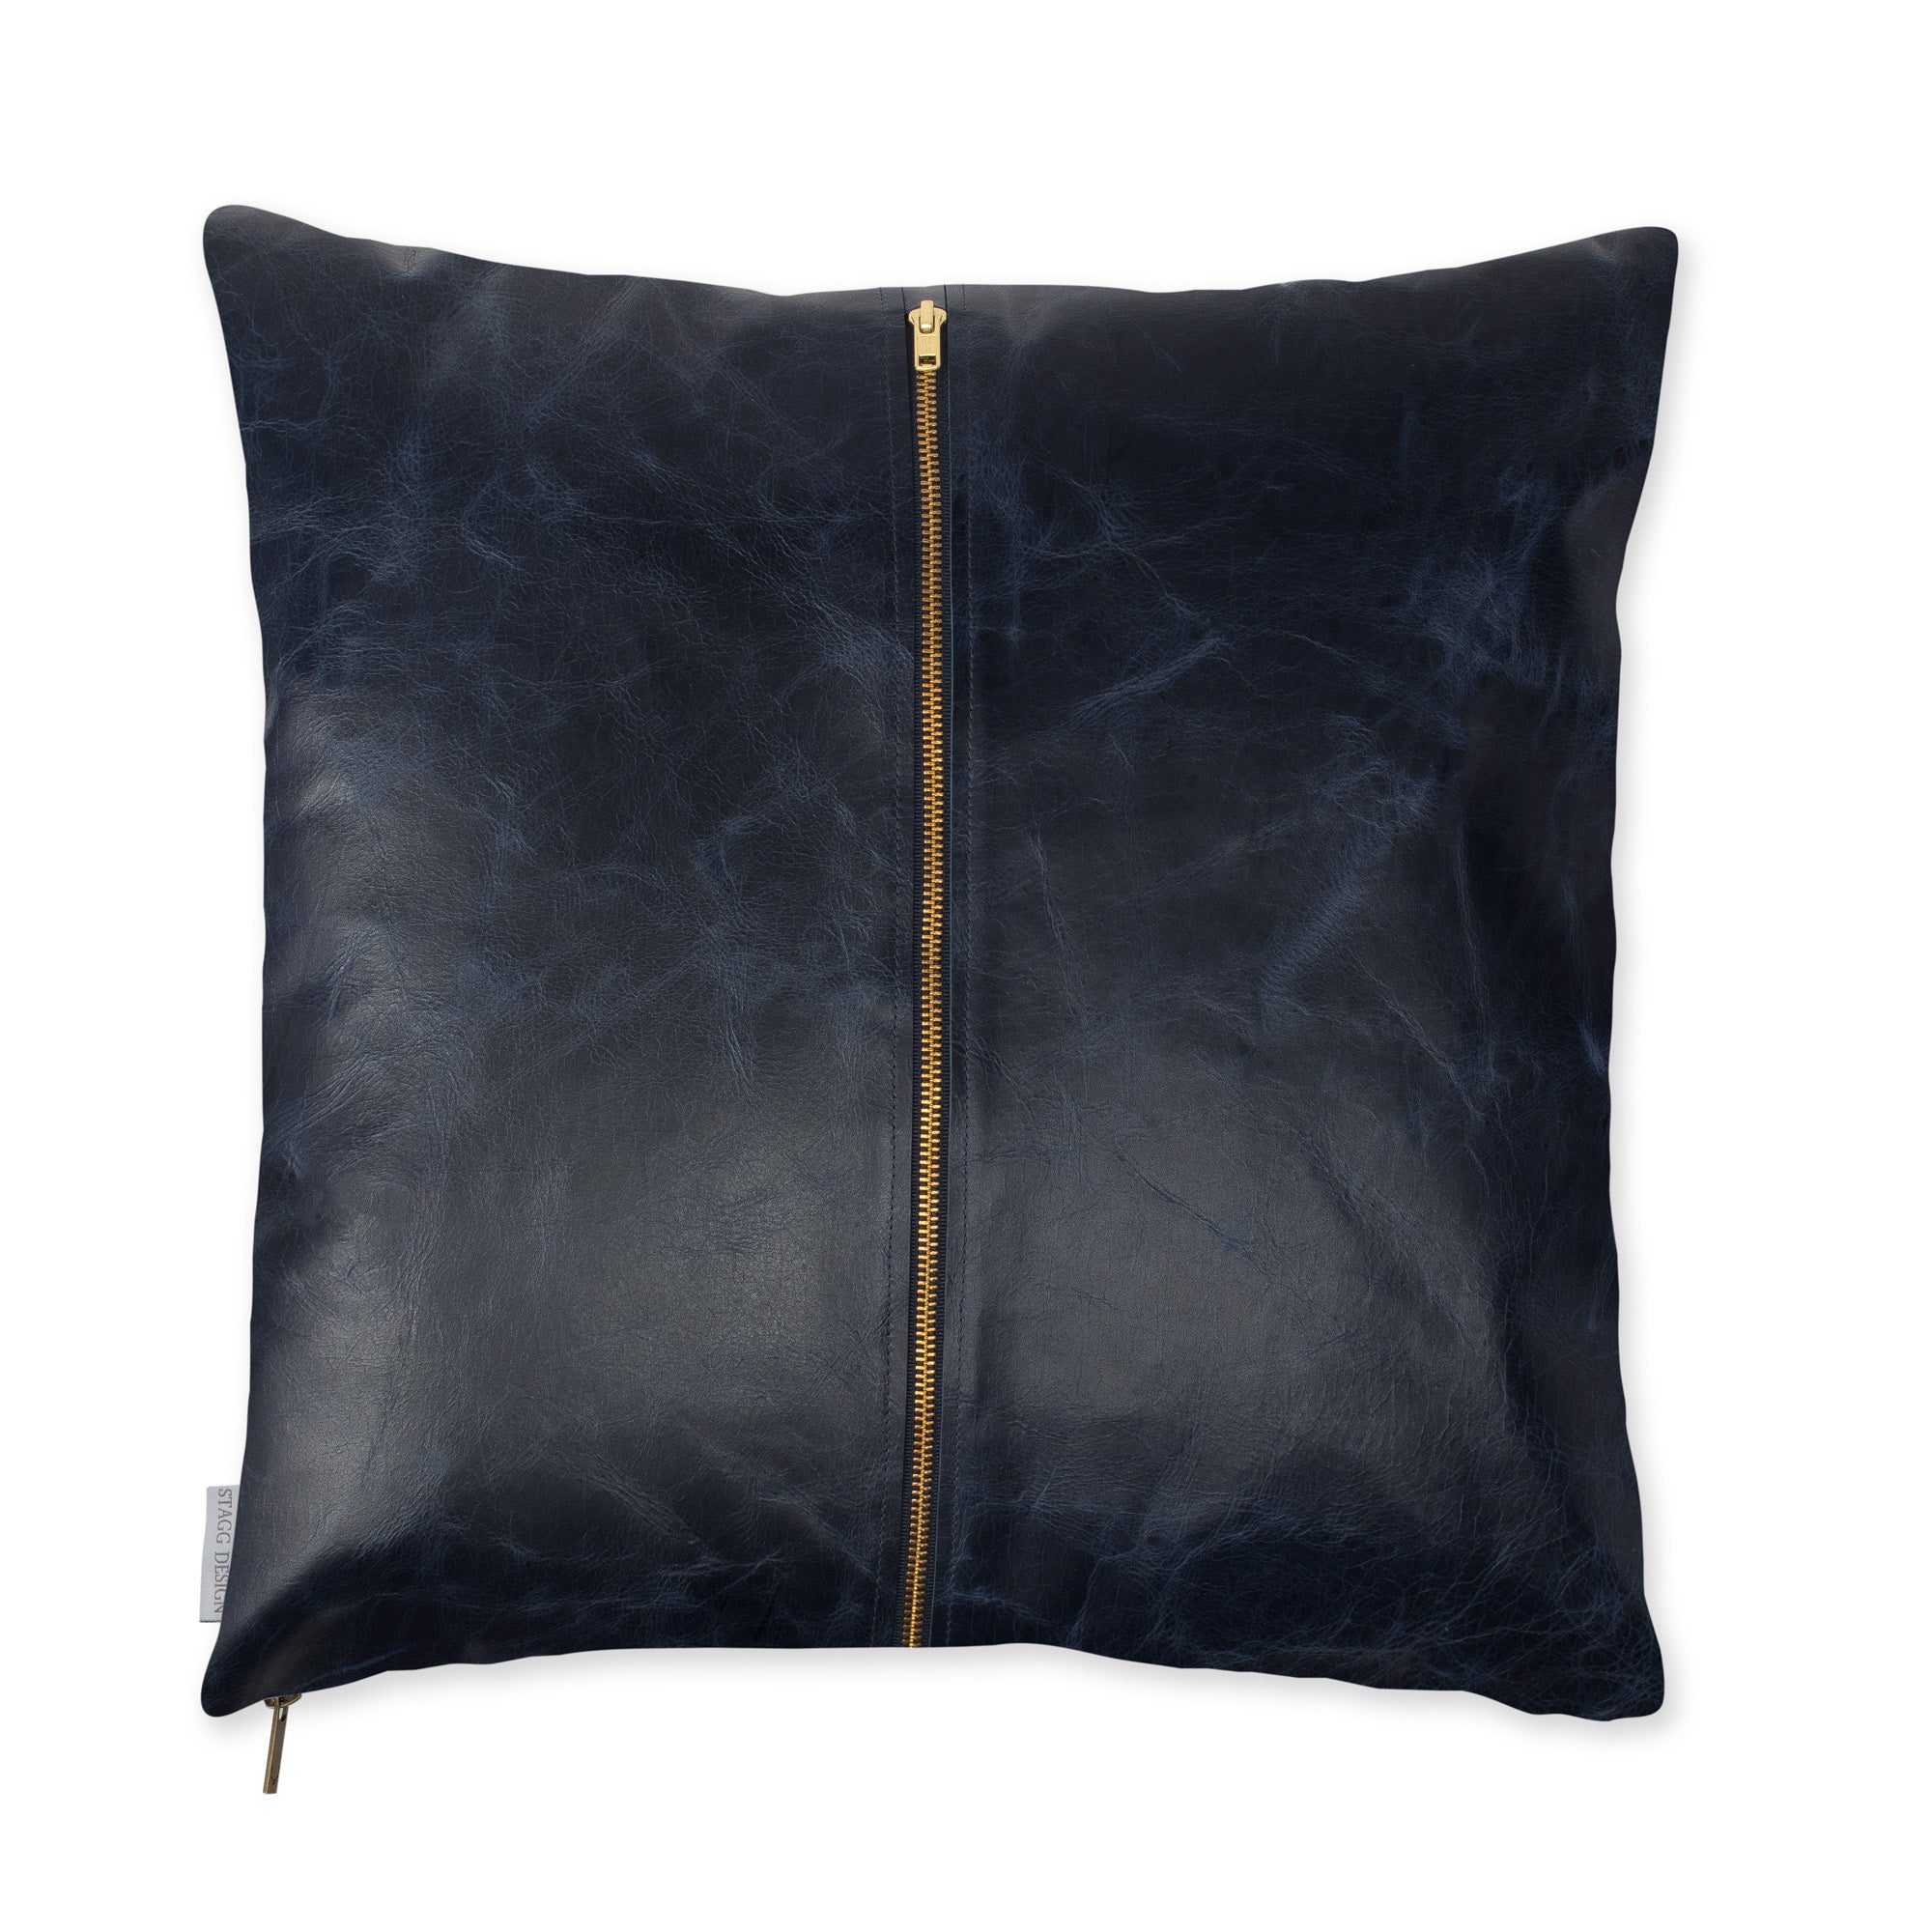 Signature Leather Pillow - Navy